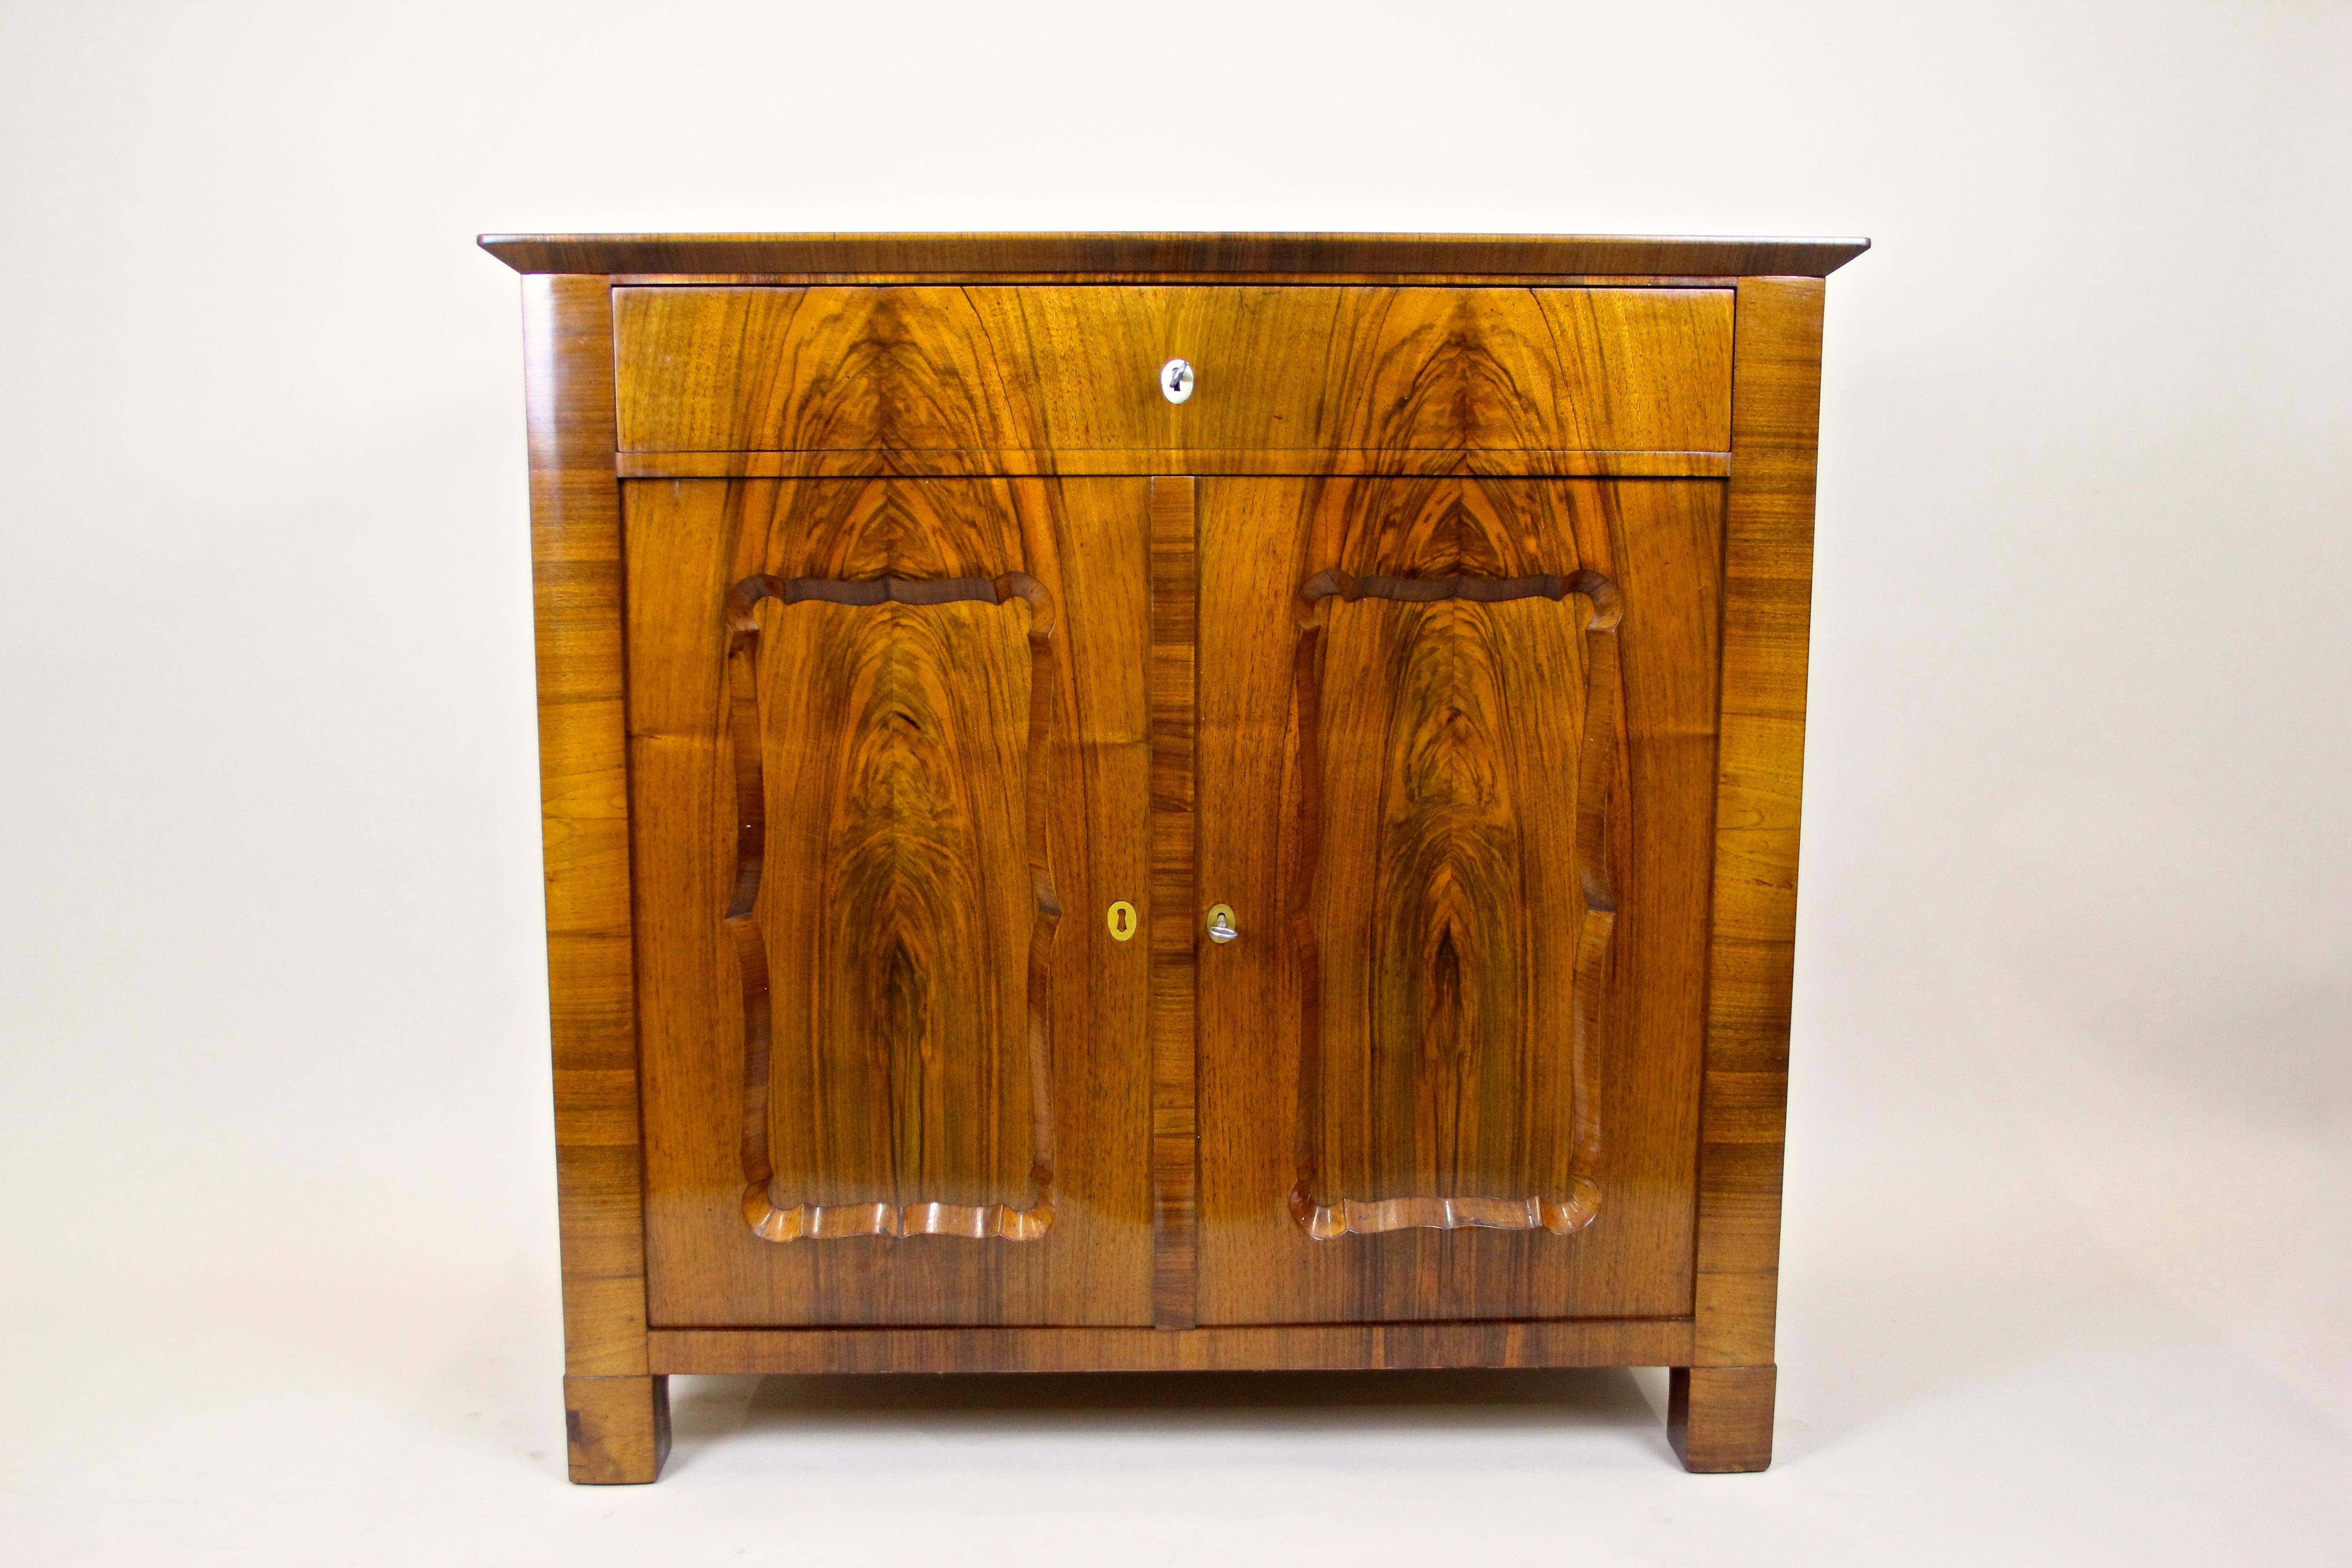 Remarkable Biedermeier Nutwood commode/ trumeau or sideboard artfully handcrafted in Austria, circa 1845. The great compact shaped body shows a fantasic walnut veneer with an outstanding grain, radiantly hand-polished with honey-shellac. Supported